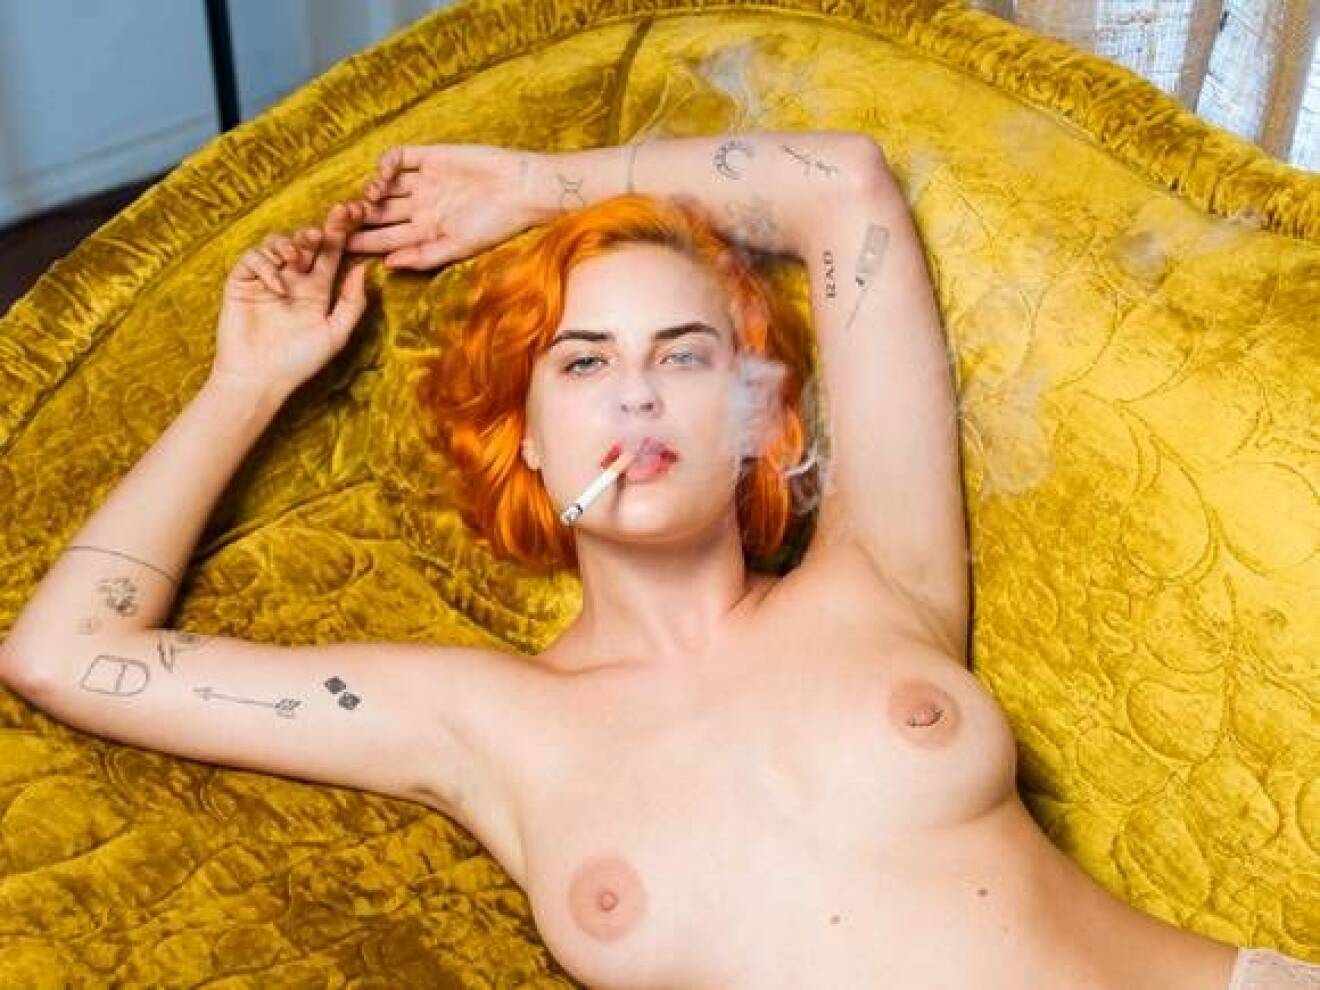 tallulah-willis-tyler-shields-provocateur-photo-book-uncensored__opt